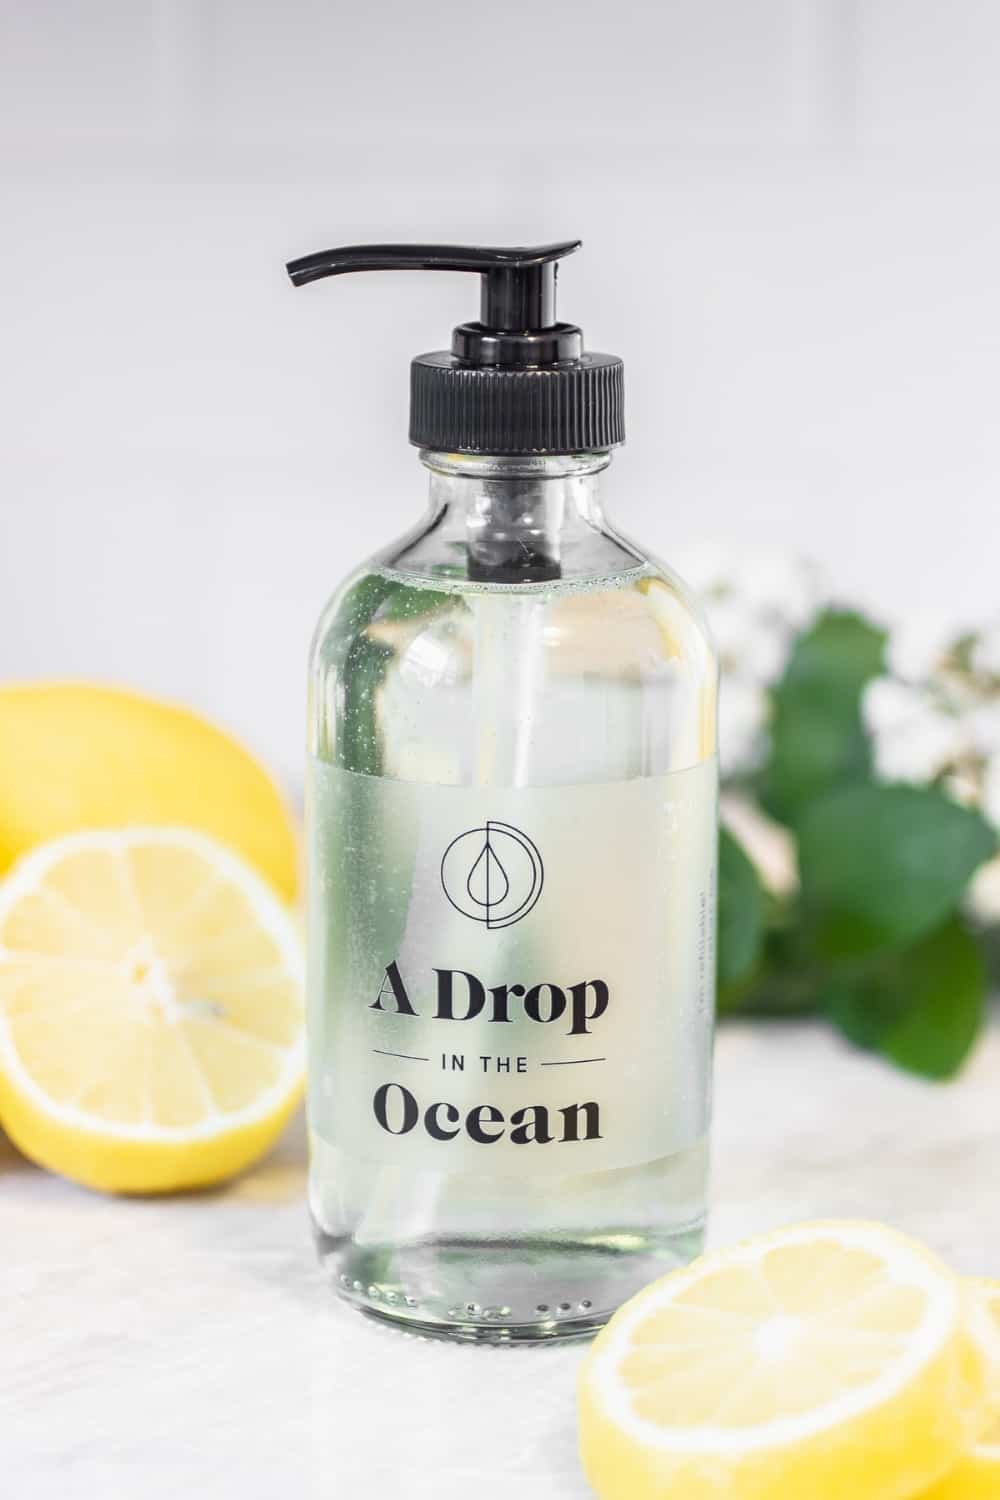 Conventional cleaning products may bring instant shine, but they ironically contribute to toxic waste and plastic pollution. Which is why it’s critical to use truly eco friendly cleaning products. Image by A Drop in the Ocean #ecofriendlycleaningproducts #naturalcleaningproducts #sustainablejungle